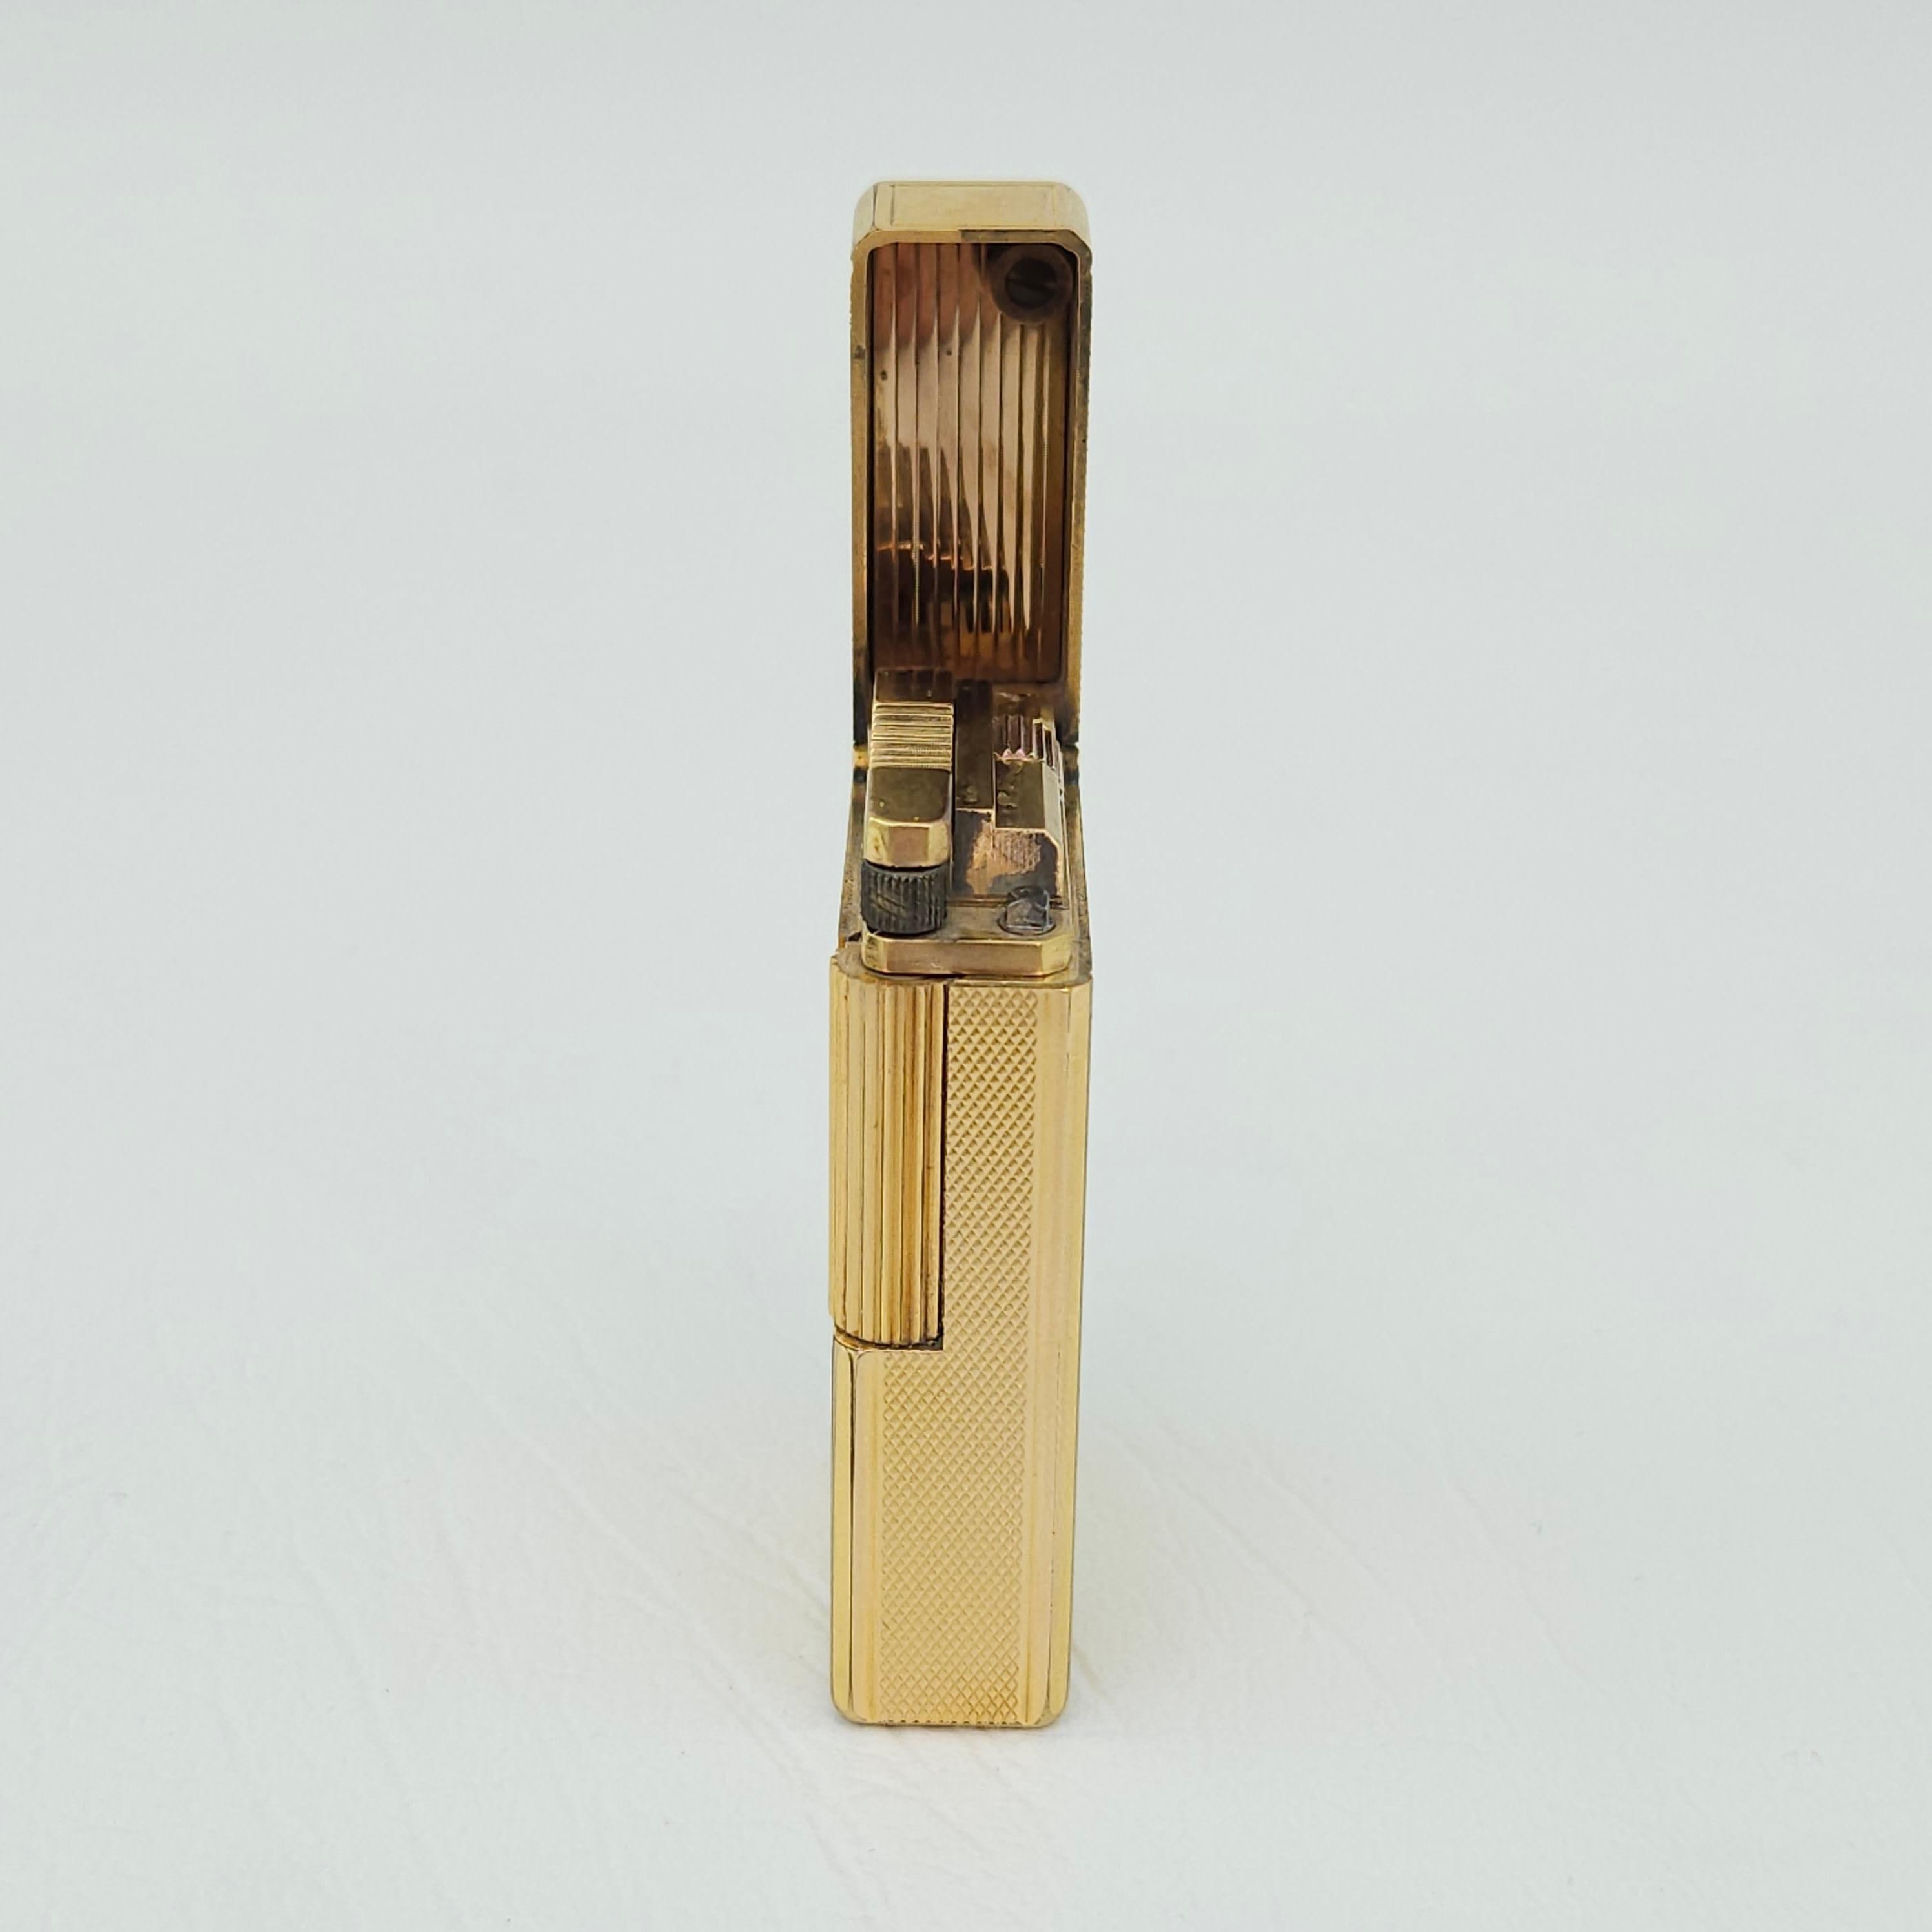 Late 20th Century Vintage Gold-Plated Gas Lighter By S. T. Dupont, Paris For Sale